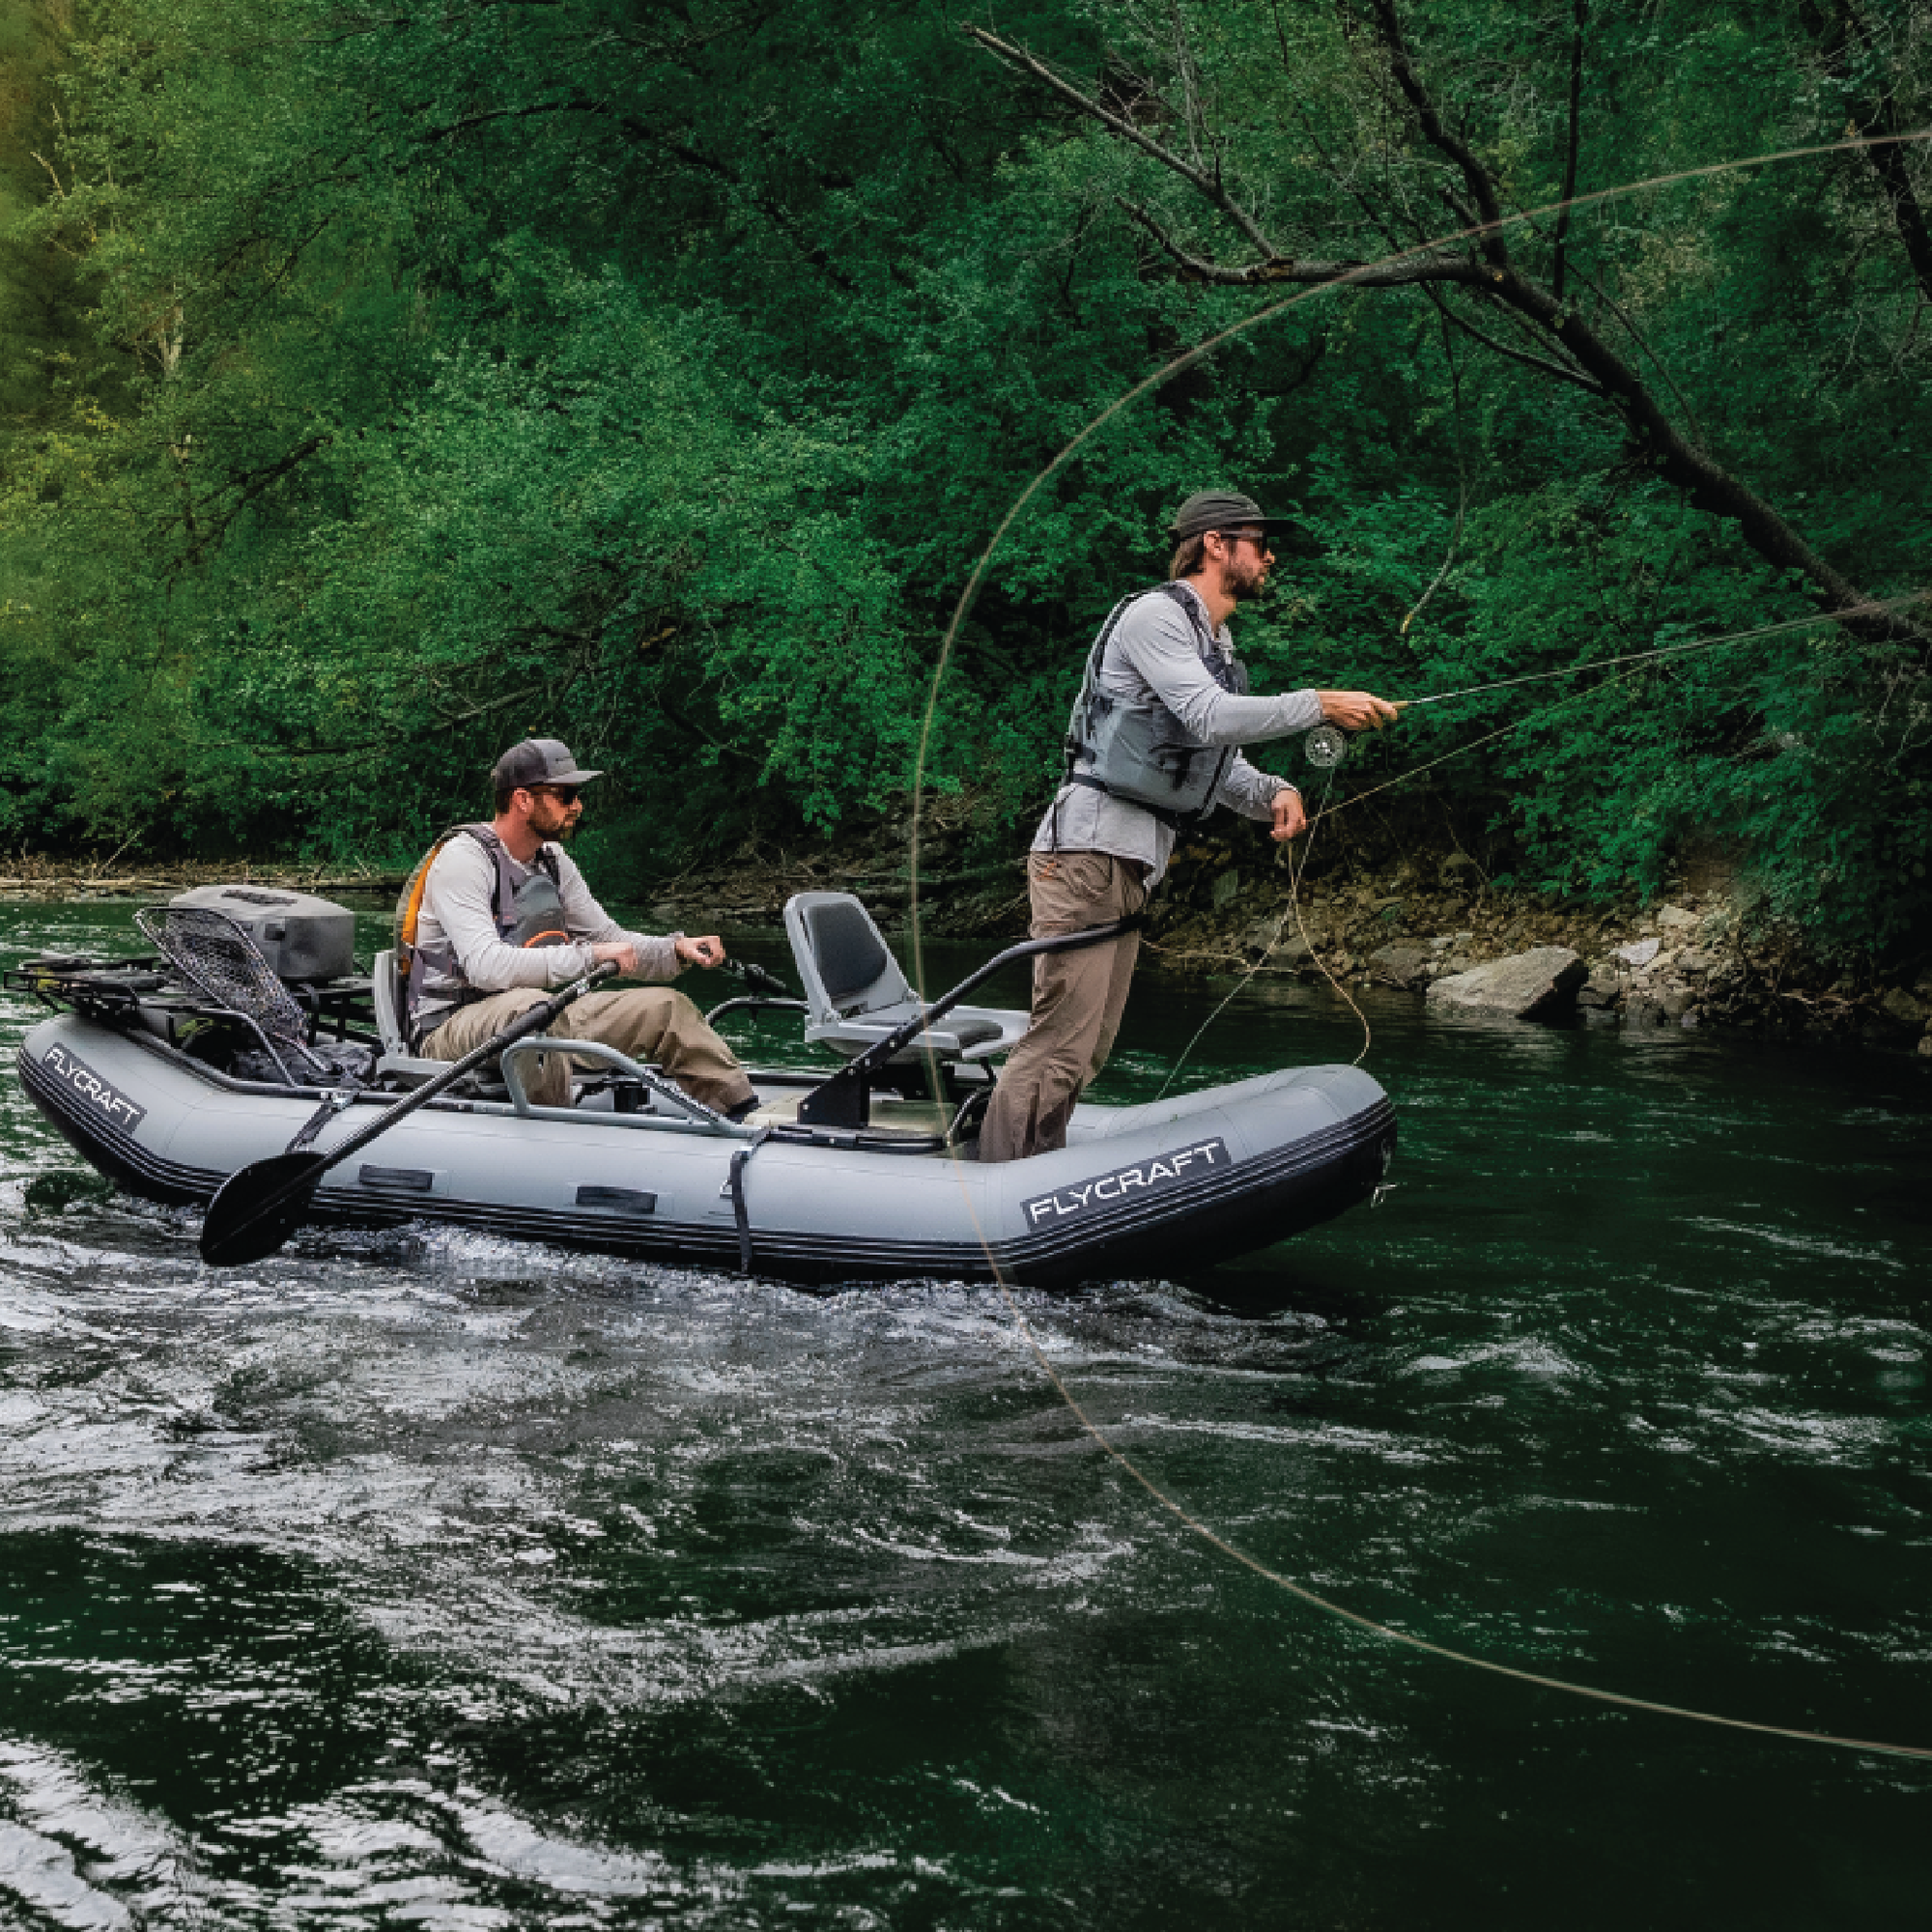 Best Compact Fishing Boats for Fly Fishing - FLYCRAFT USA